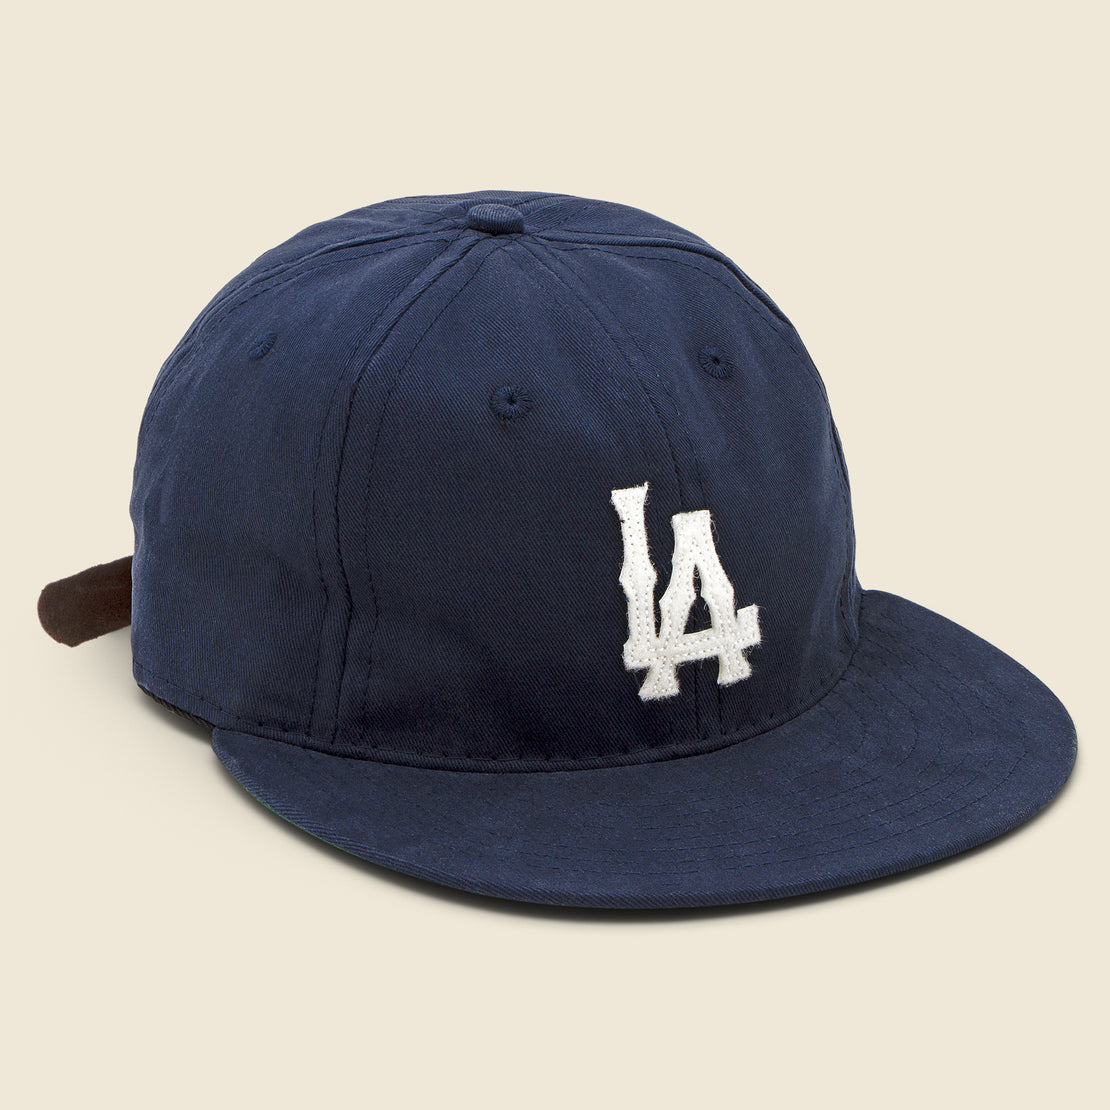 Ebbets Field Flannels Los Angeles Cotton Hat - Navy